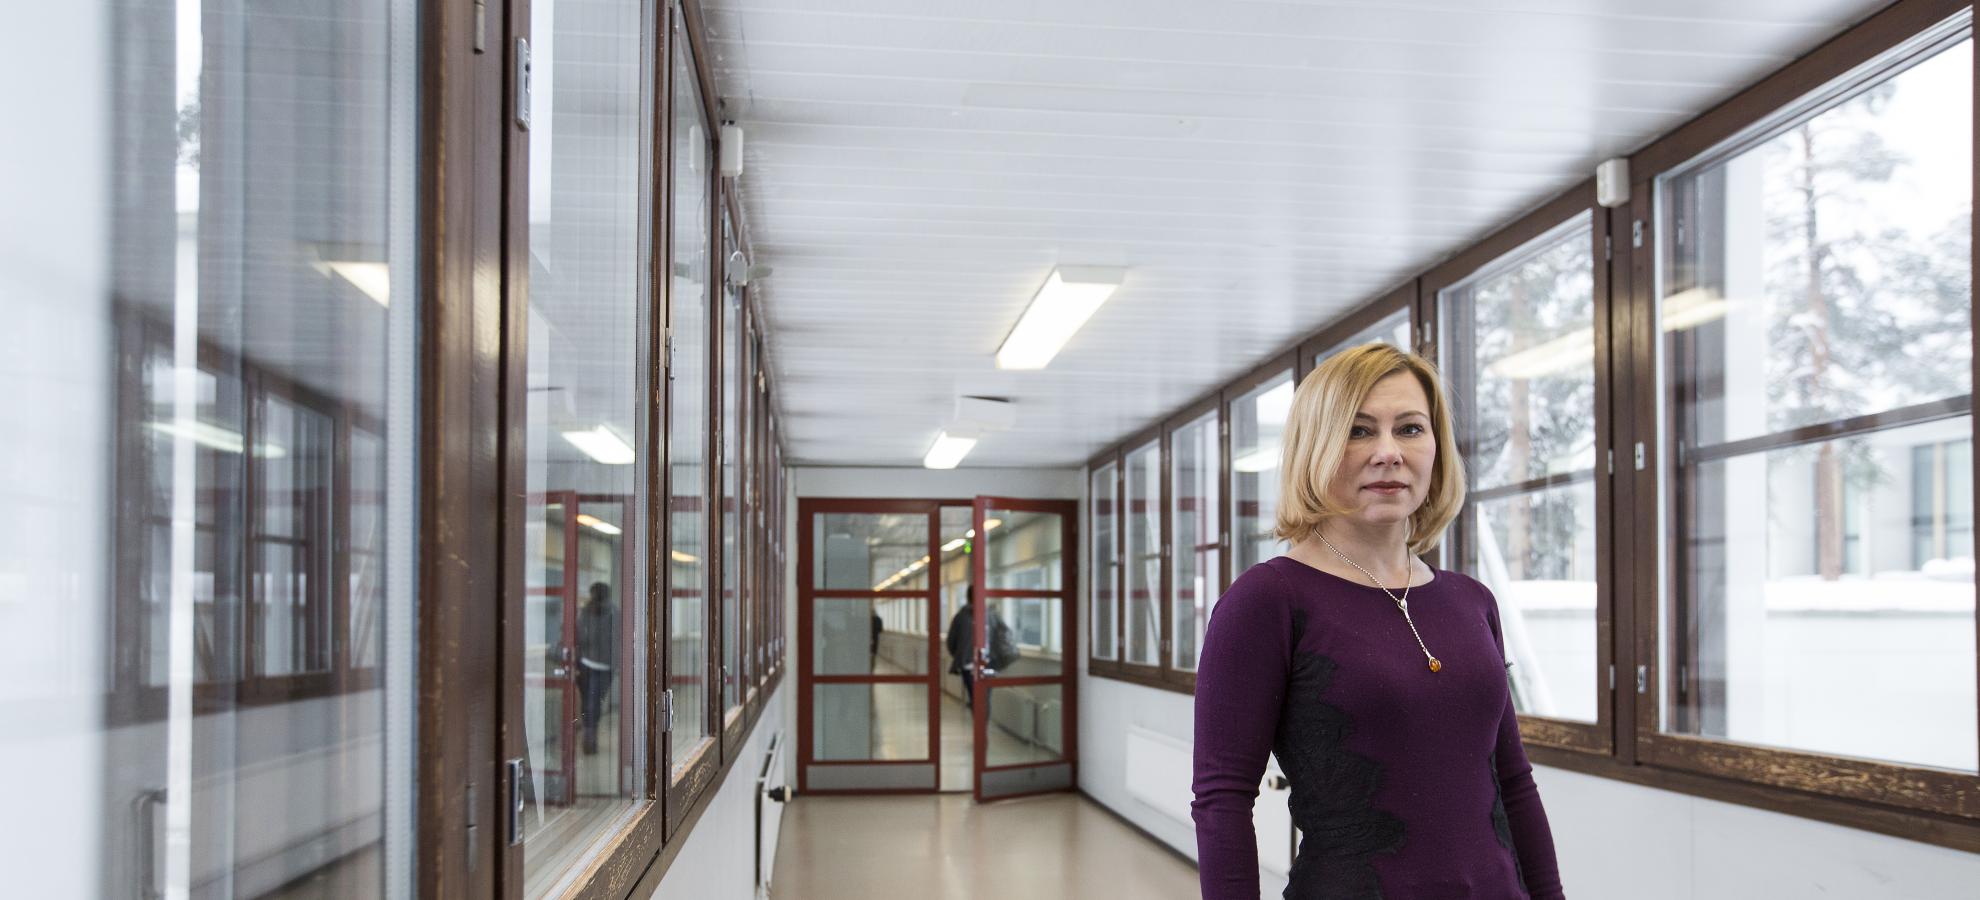 Jelena Nerman facing the camera, stands in an empty corridor lit by windows to the right of her.